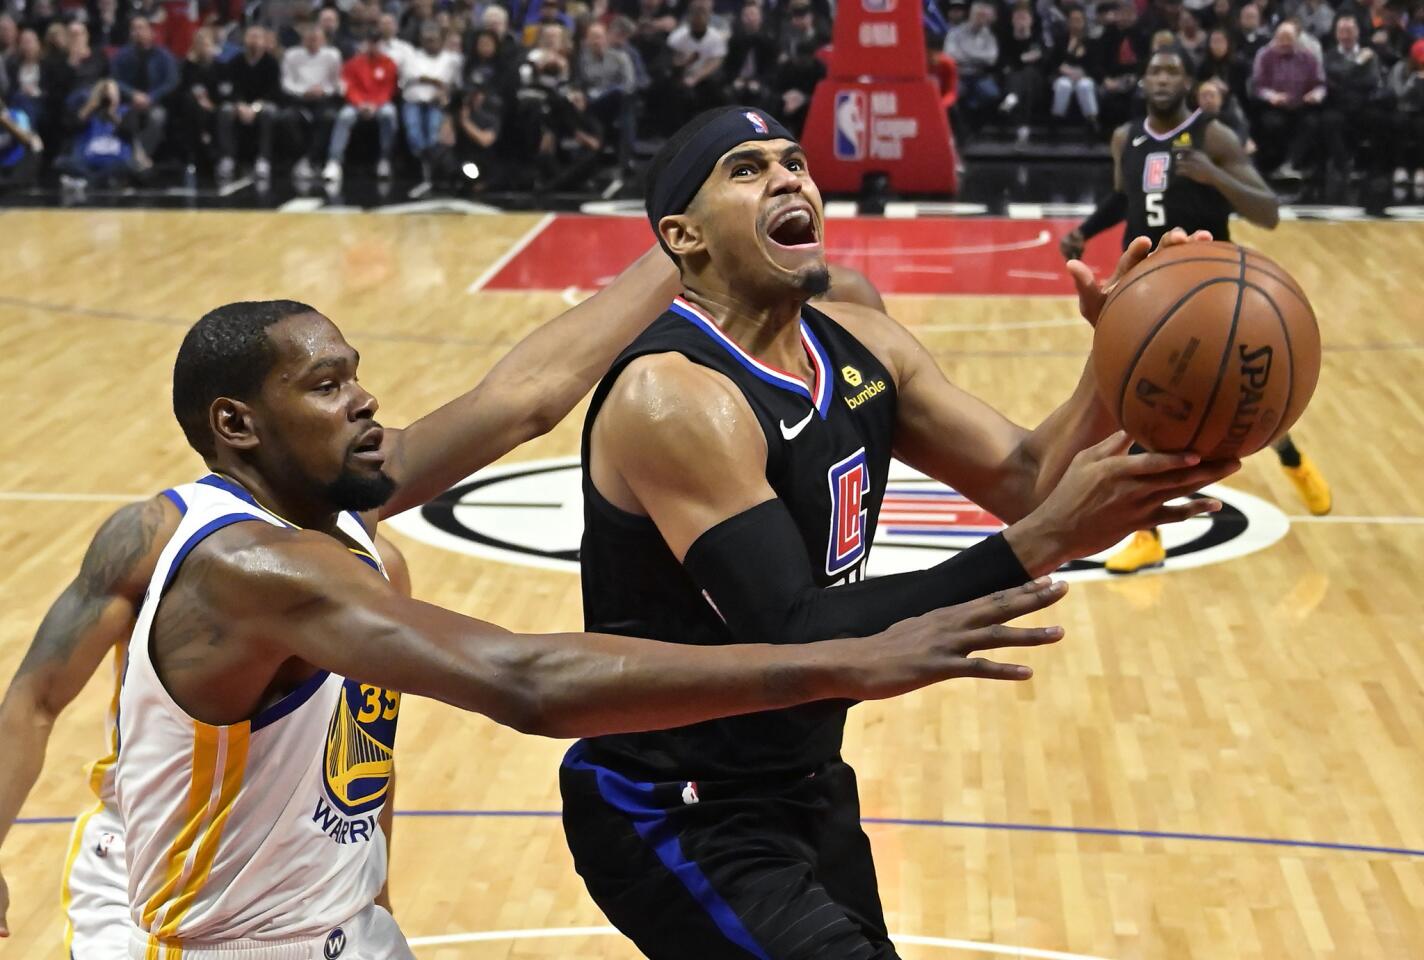 Los Angeles Clippers forward Tobias Harris, right, shoots as Golden State Warriors forward Kevin Durant defends during the second half of an NBA basketball game Friday, Jan. 18, 2019, in Los Angeles. The Warriors won 112-94. (AP Photo/Mark J. Terrill)